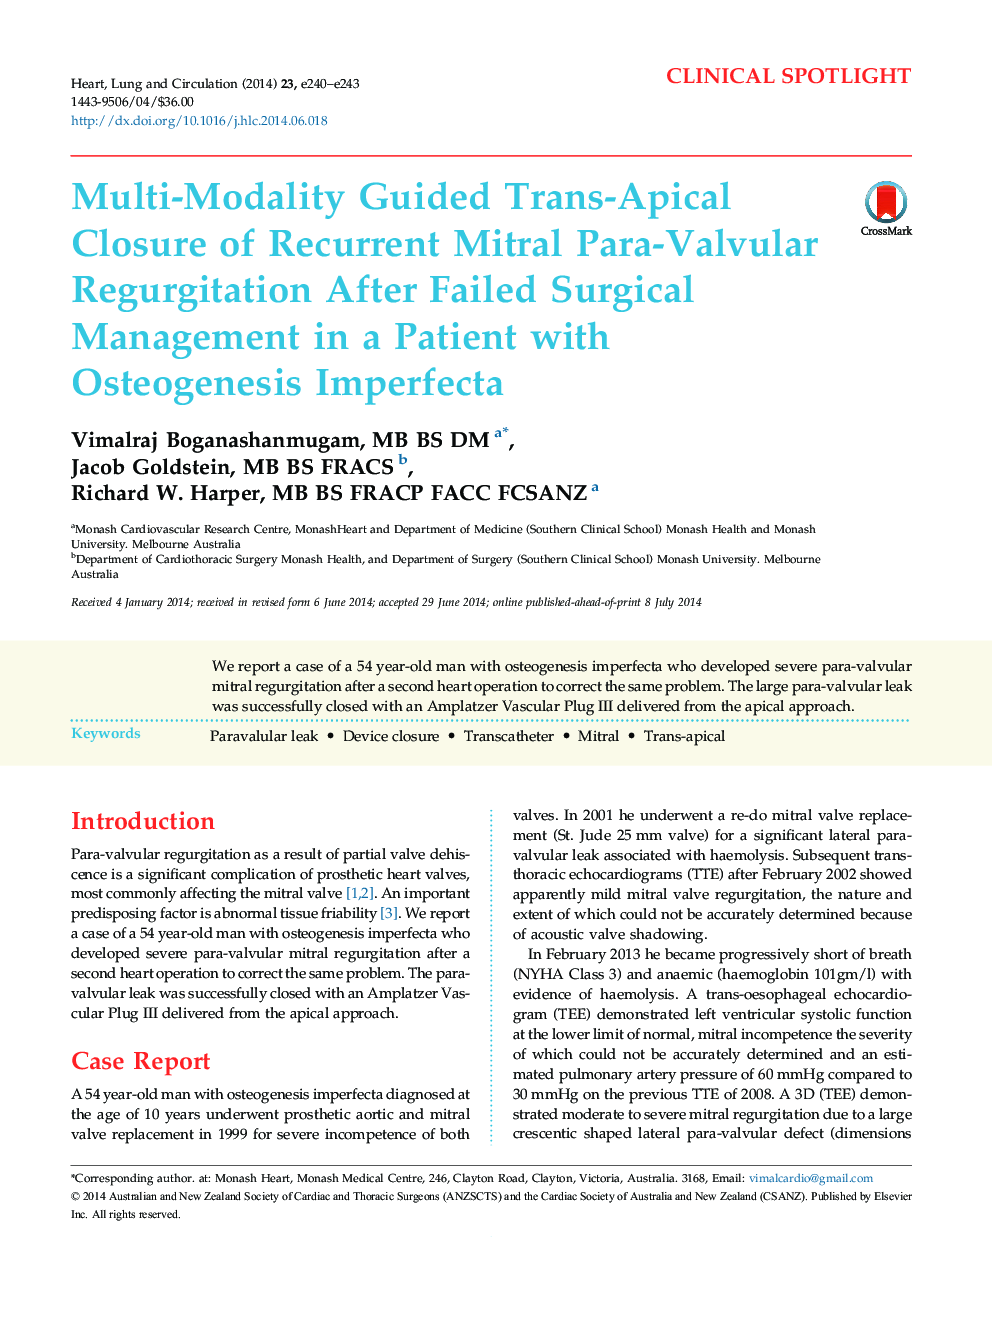 Multi-Modality Guided Trans-Apical Closure of Recurrent Mitral Para-Valvular Regurgitation After Failed Surgical Management in a Patient with Osteogenesis Imperfecta